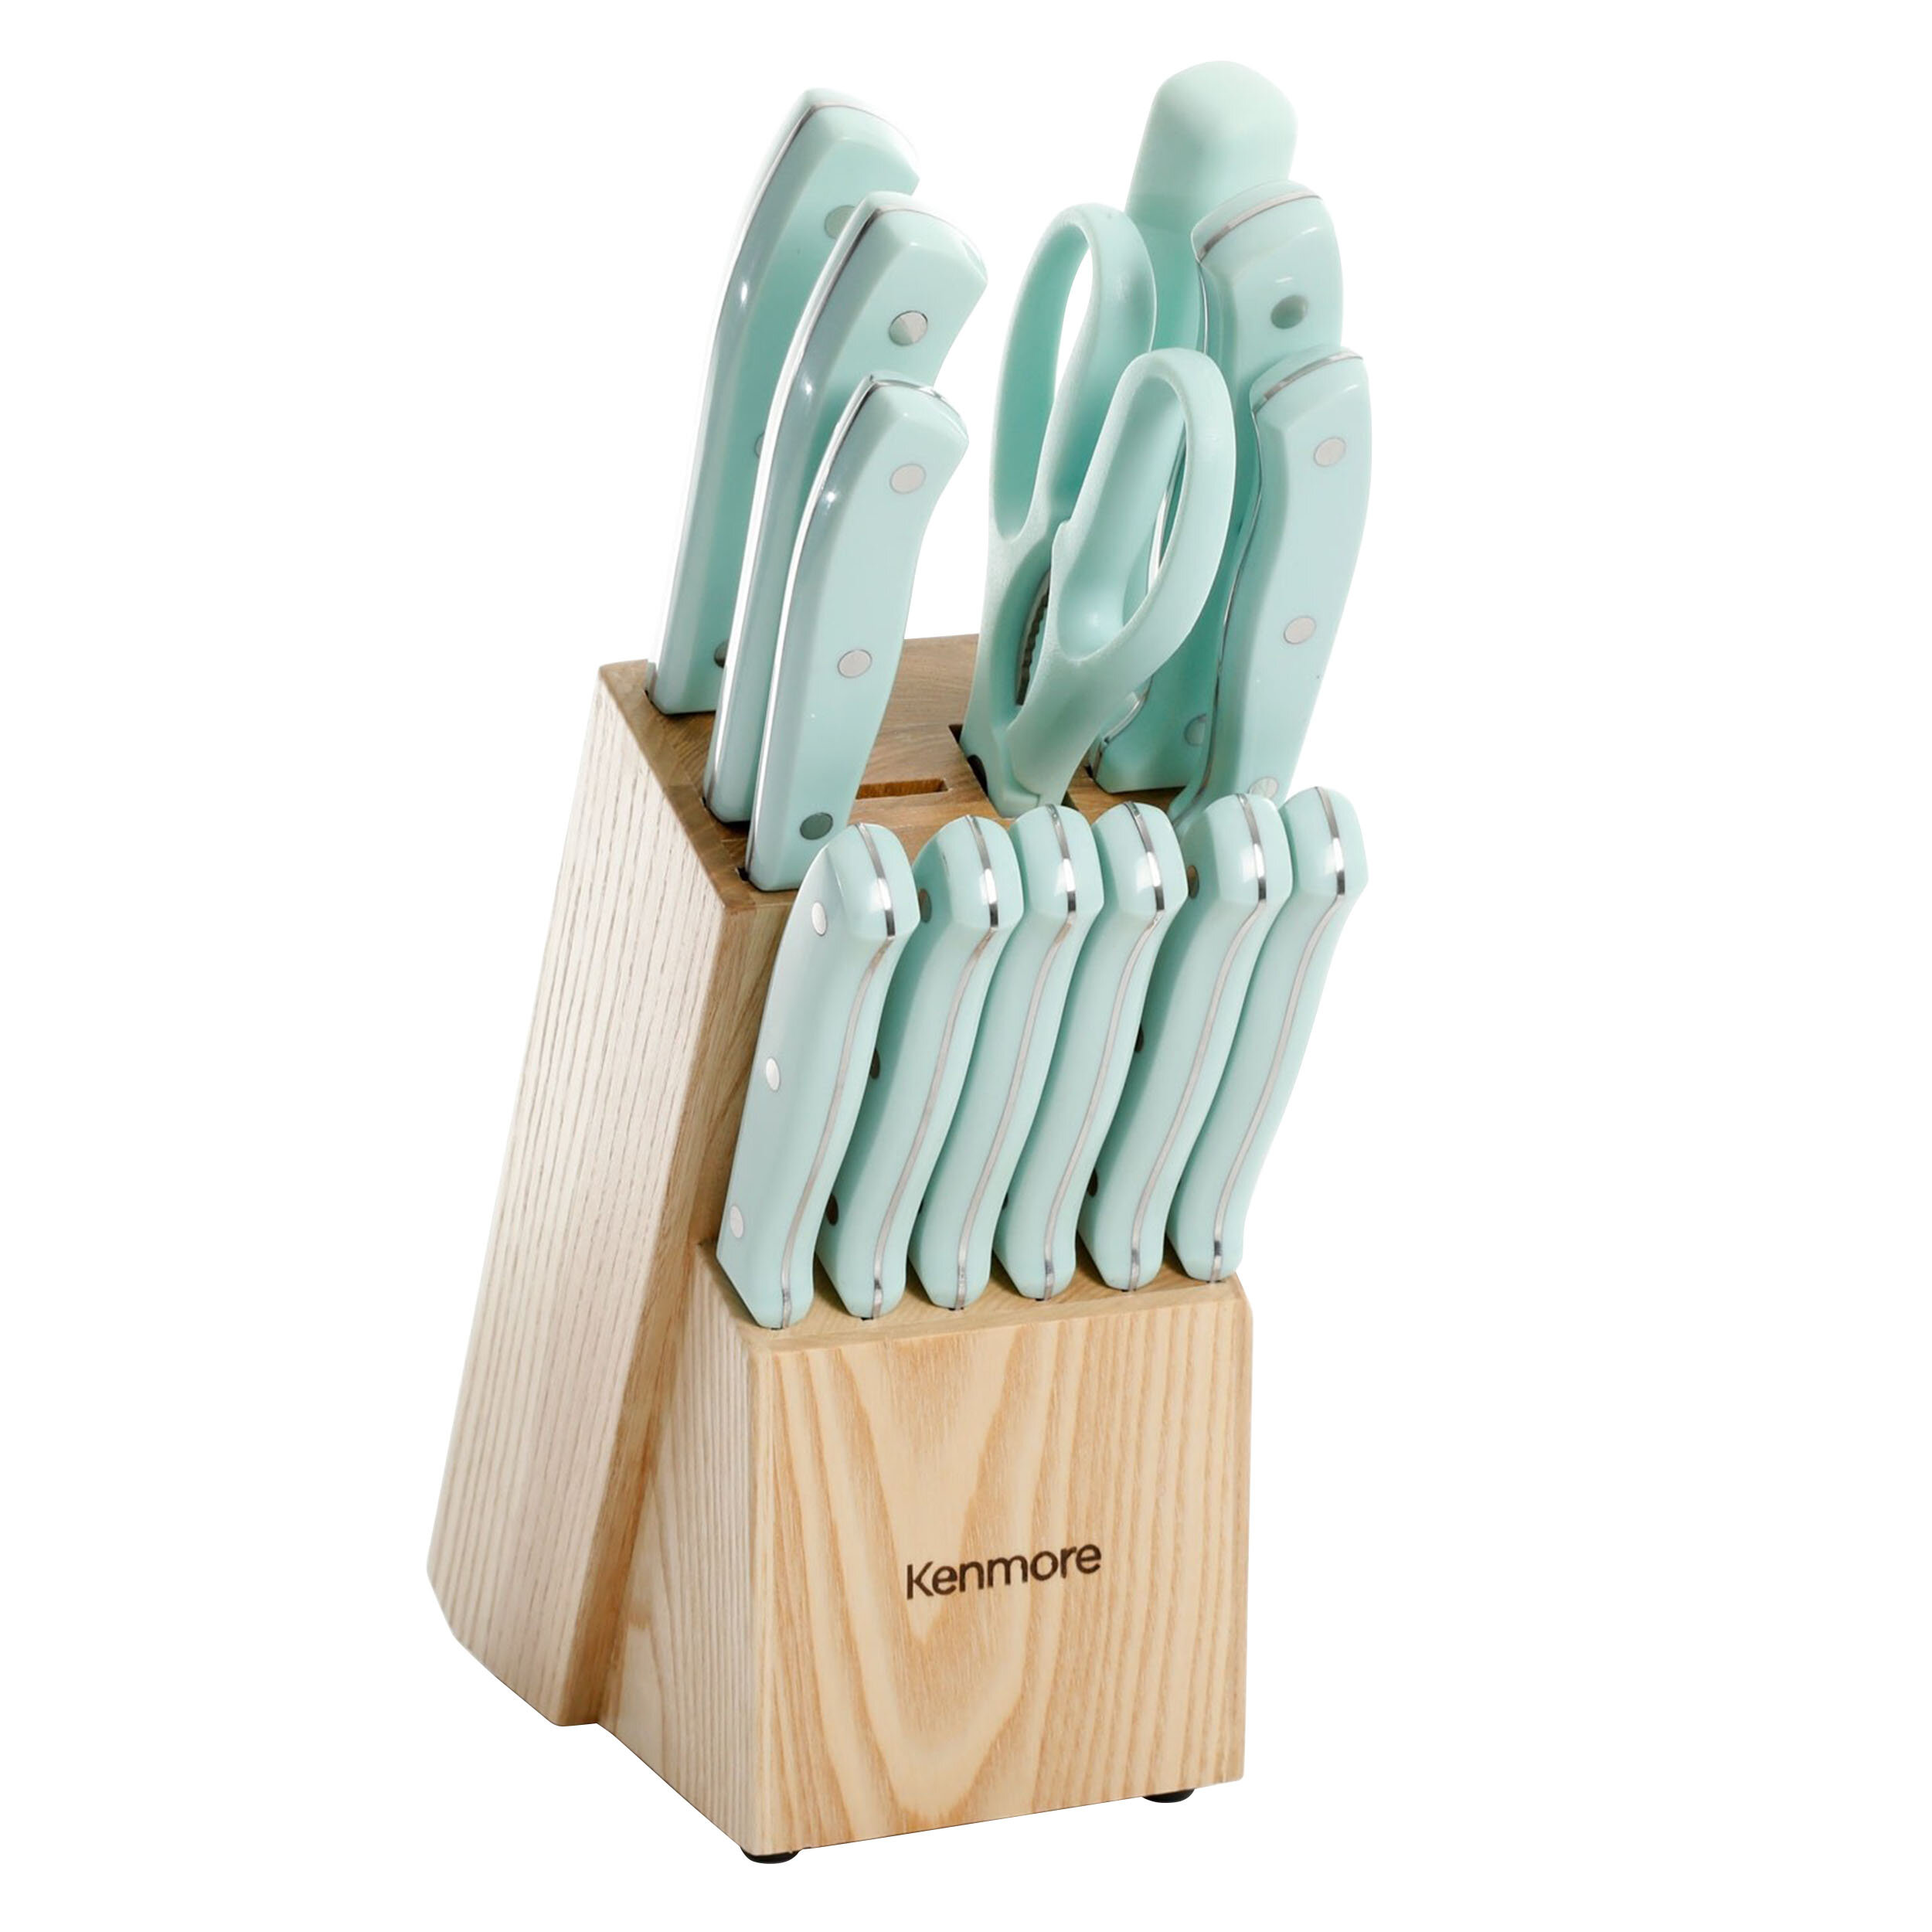 GreenLife  Stainless Steel 13-Piece Knife Block Cutlery Set